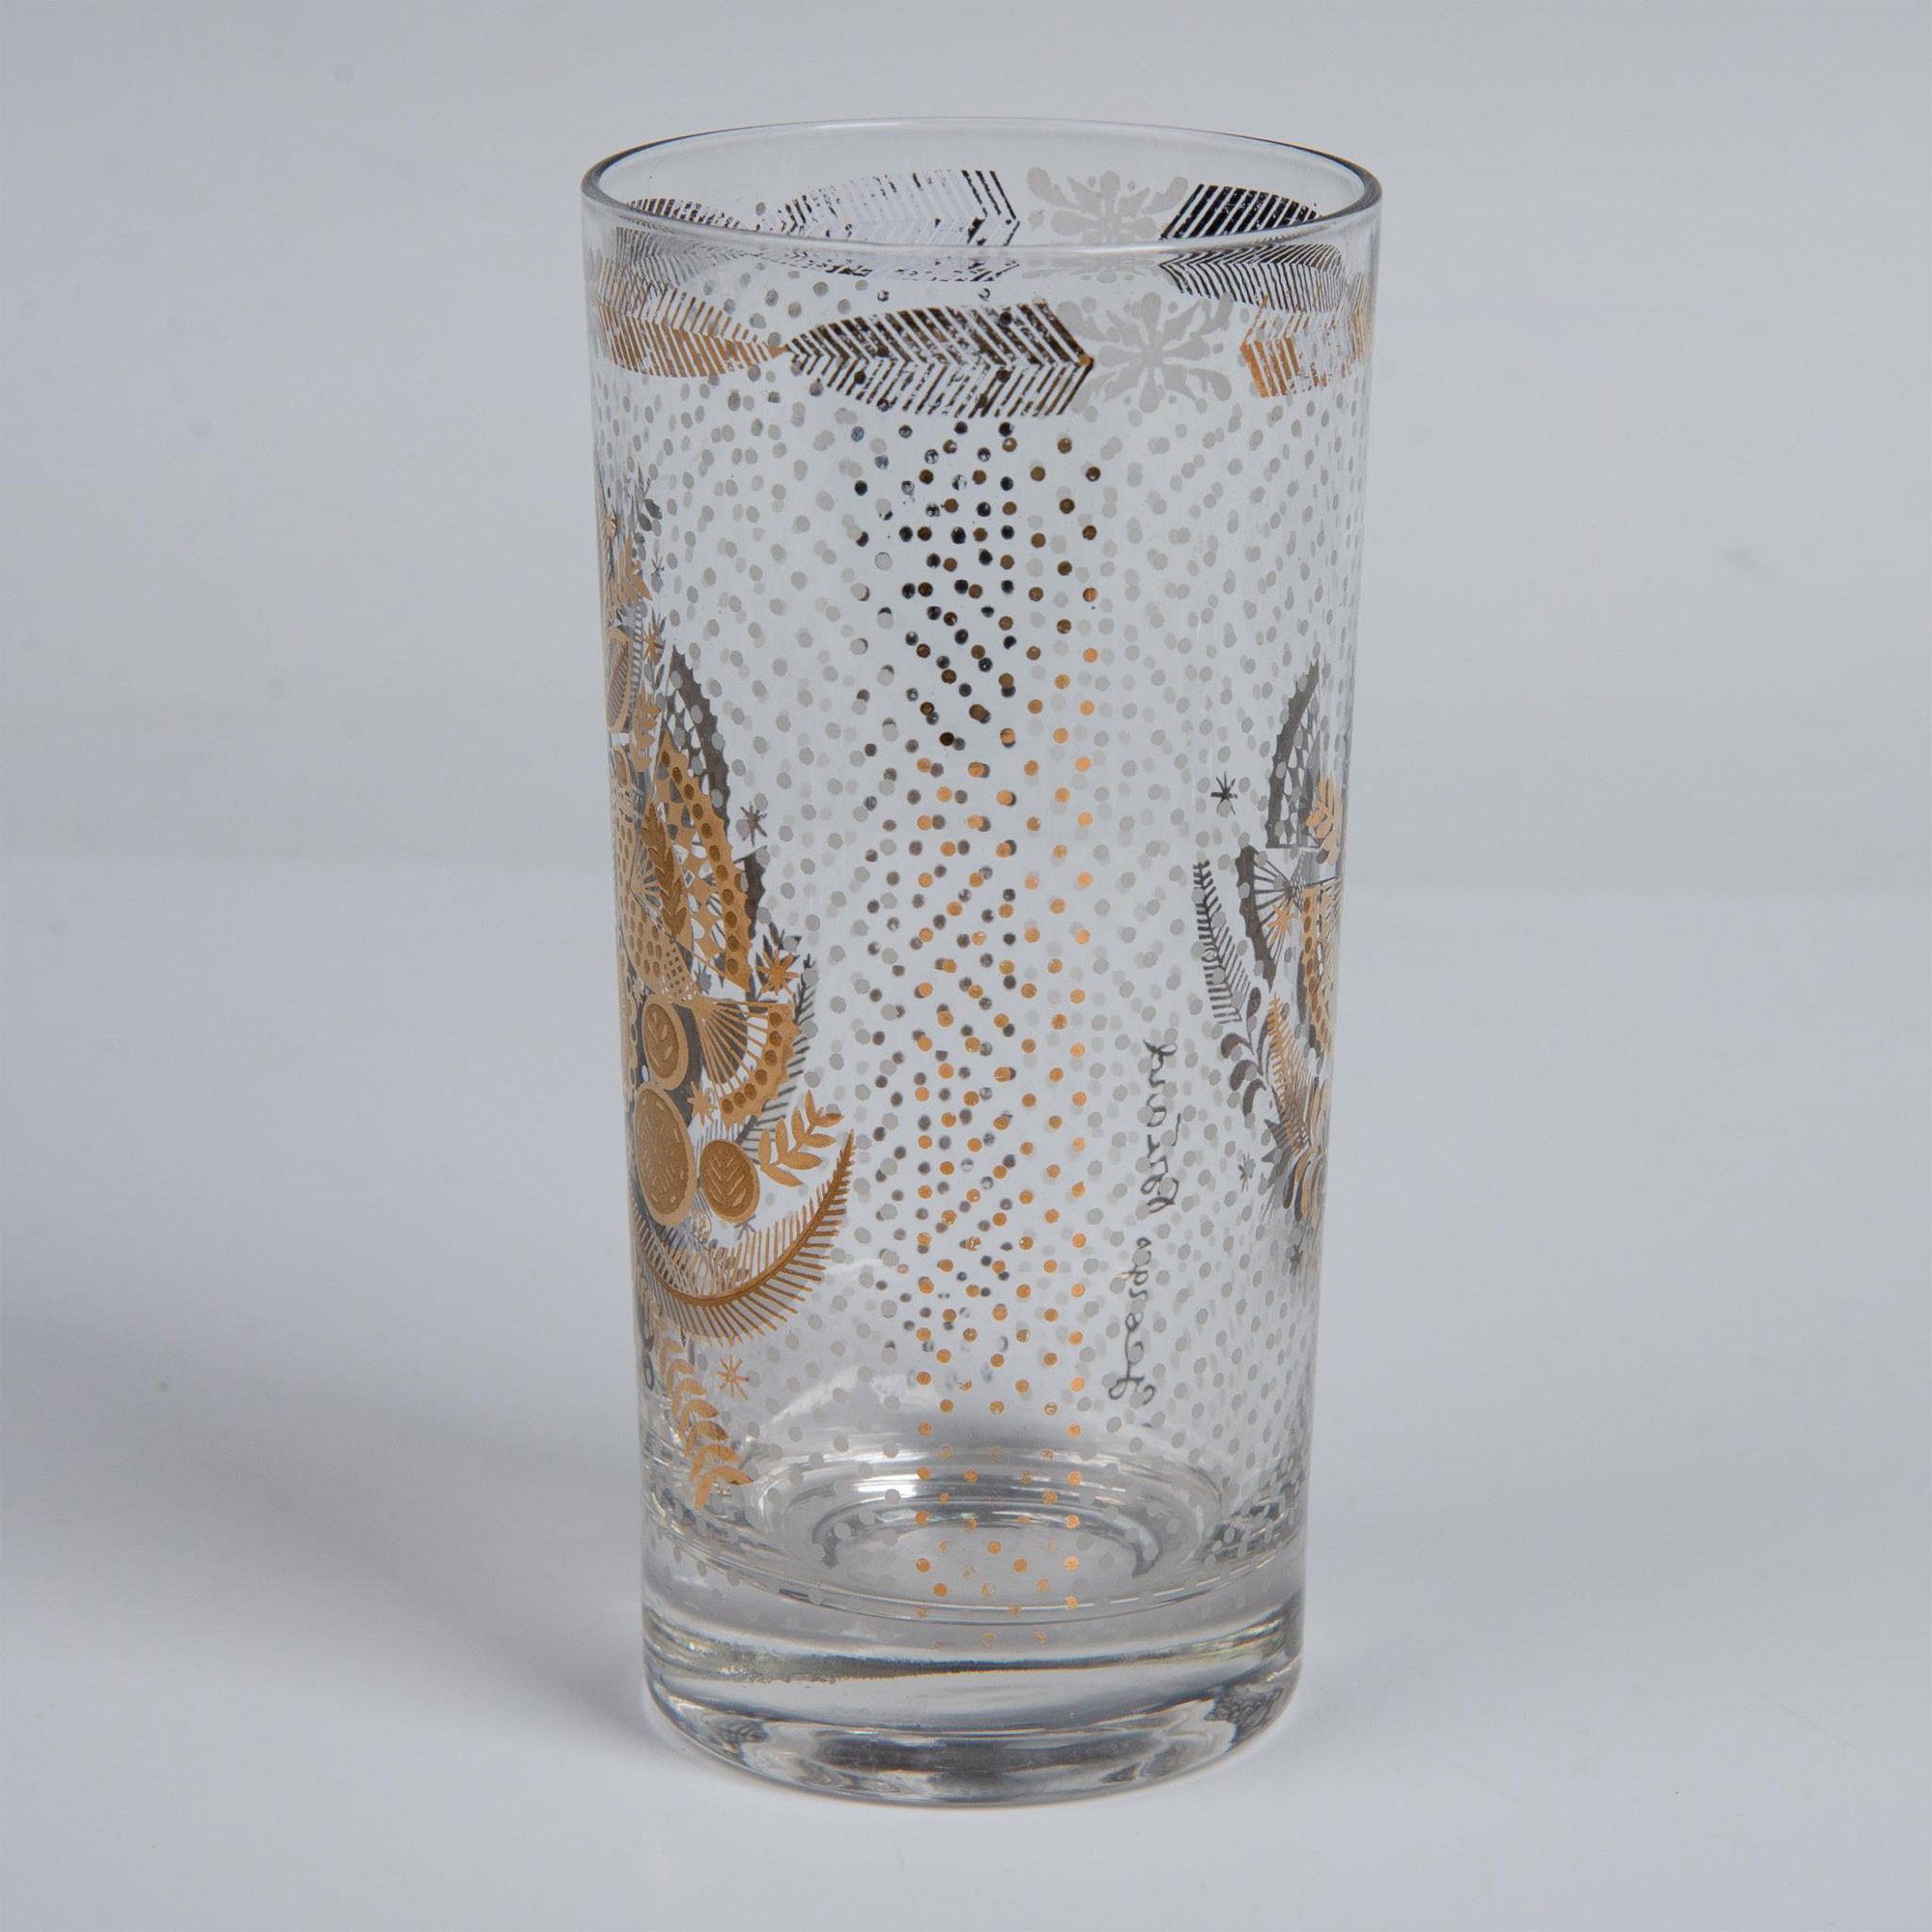 7pc Georges Briard Highball Glasses, Sonata Pattern - Image 3 of 5